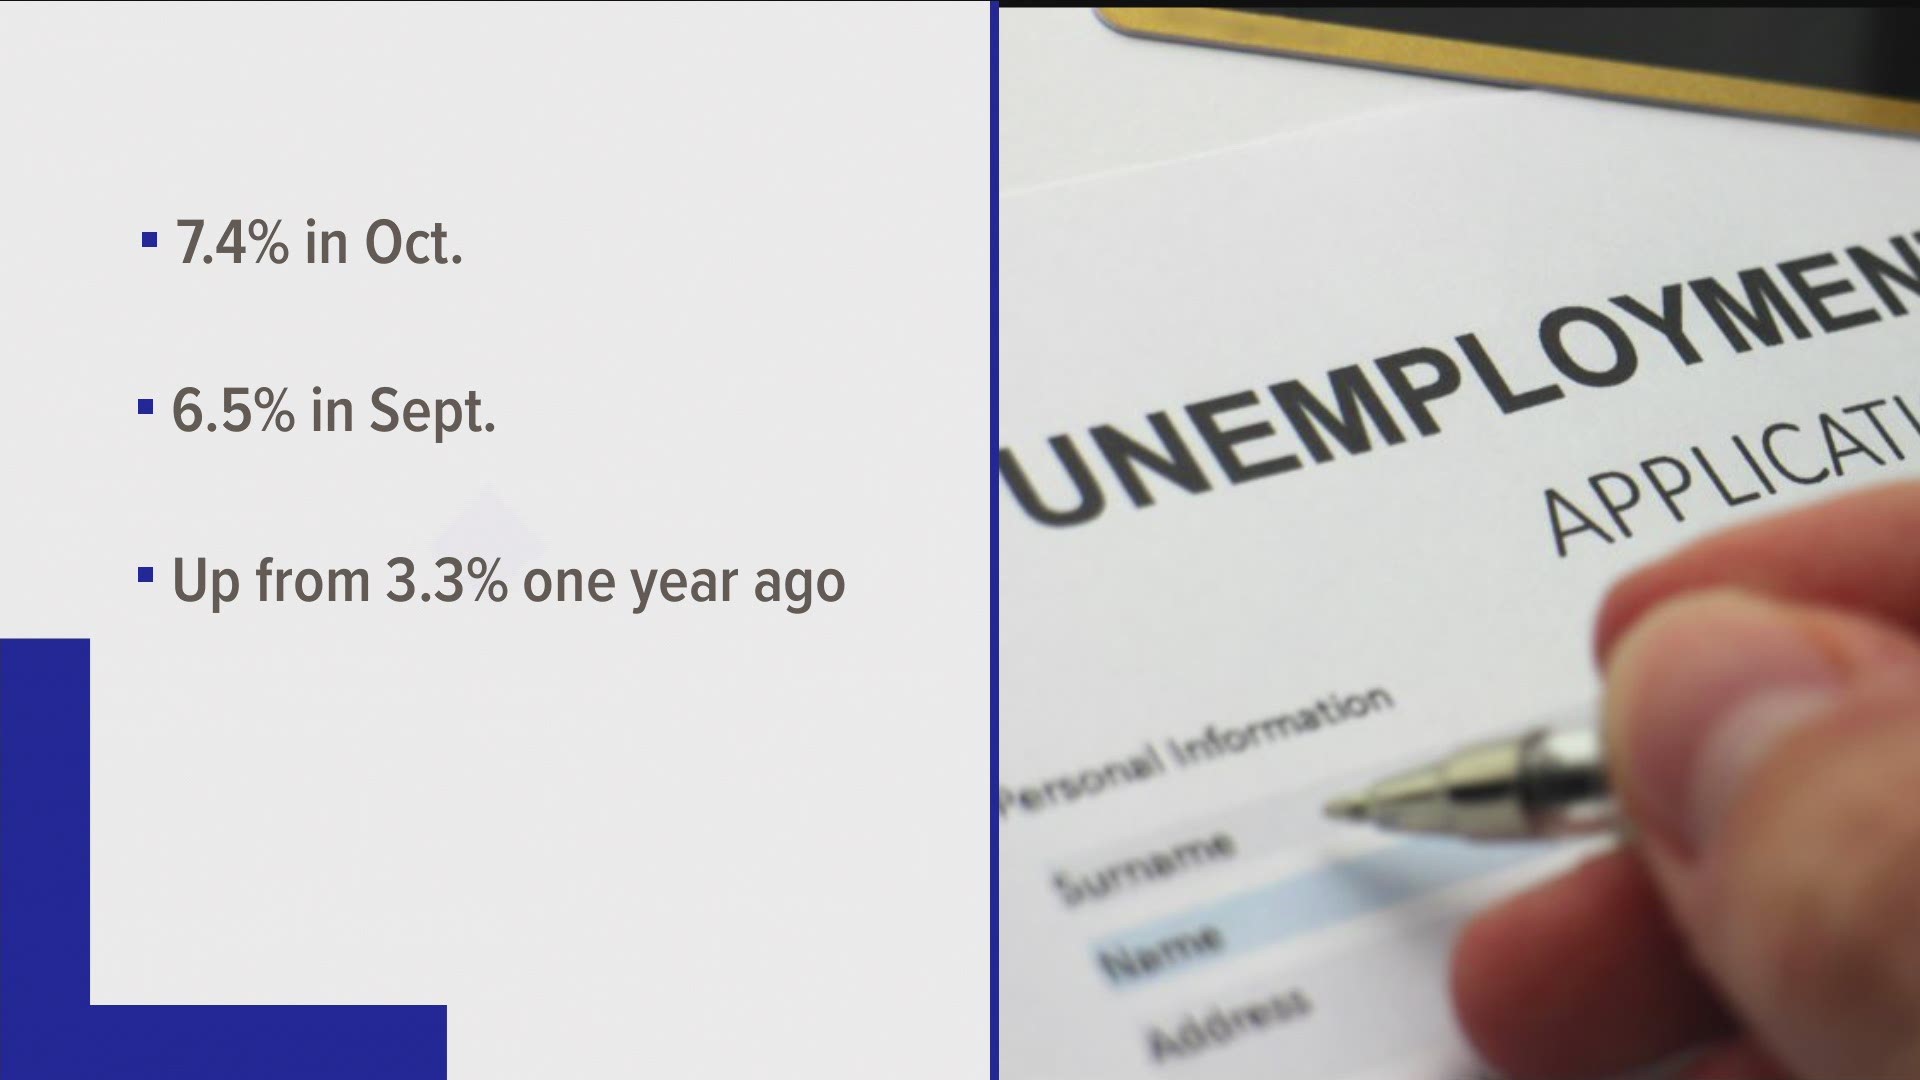 The unemployment rate in Tennessee was 7.4% in October, up significantly from the previous year's rate of 3.3%.